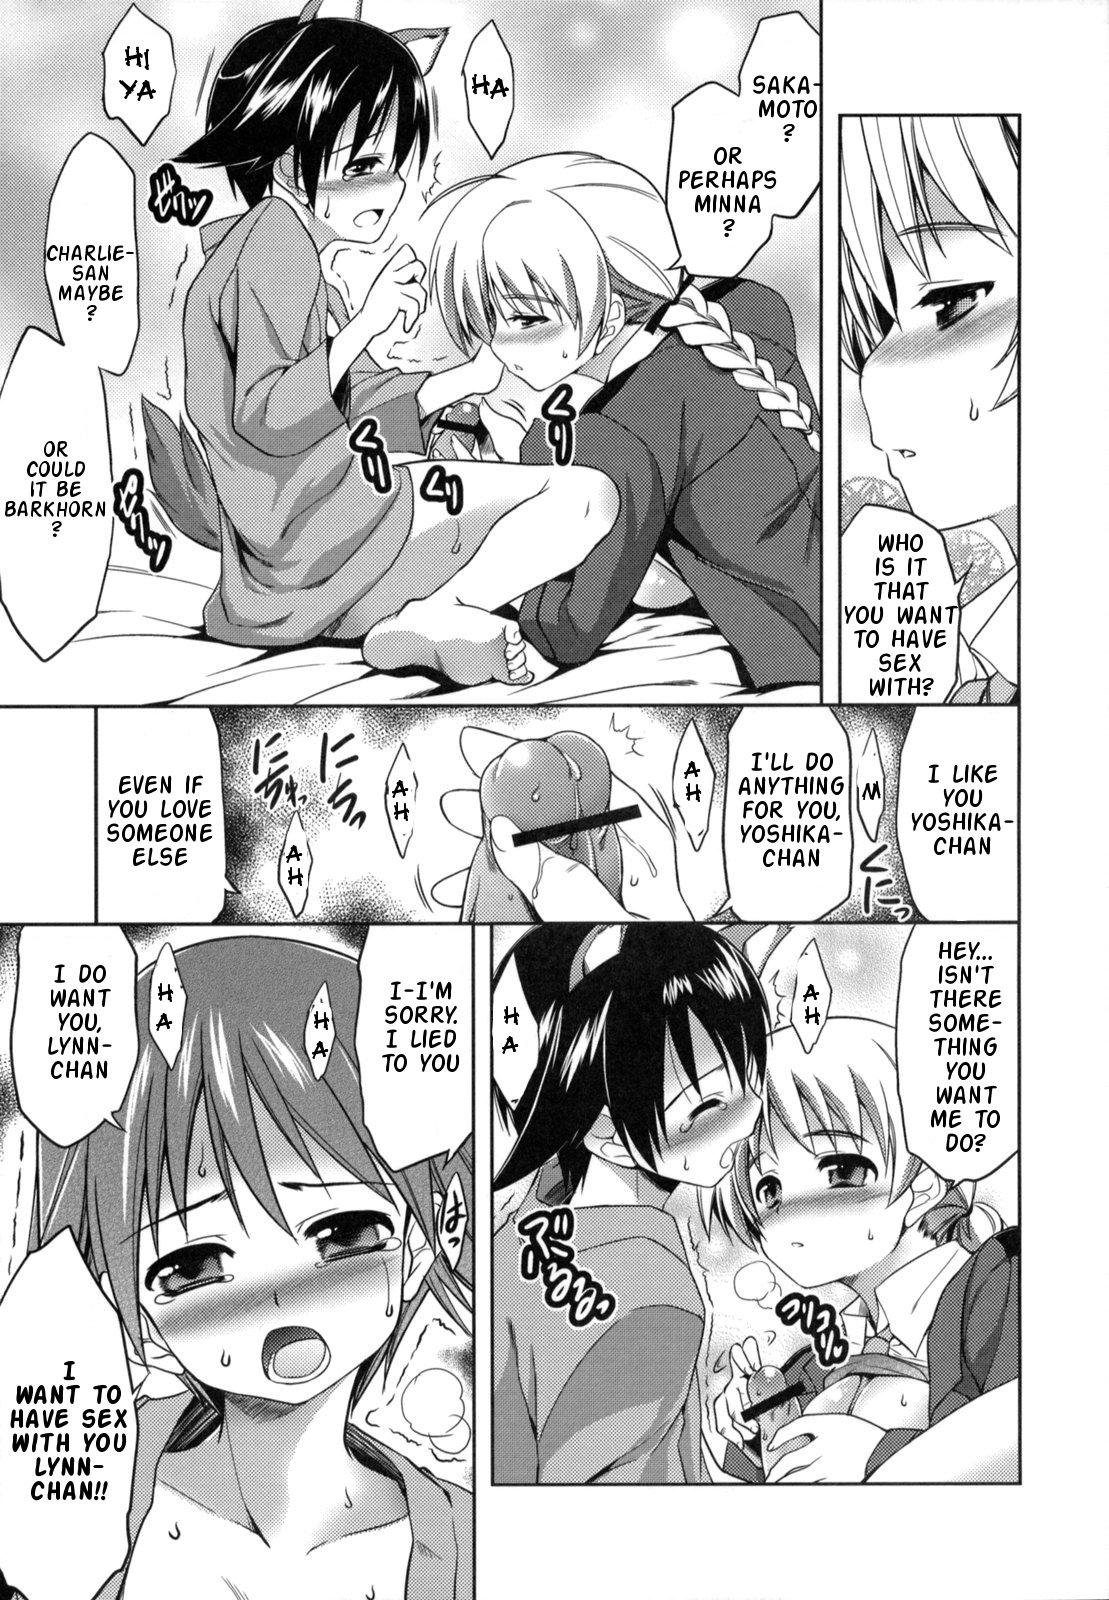 Best Blowjob GL WITCHES - Strike witches Gay Bang - Page 6